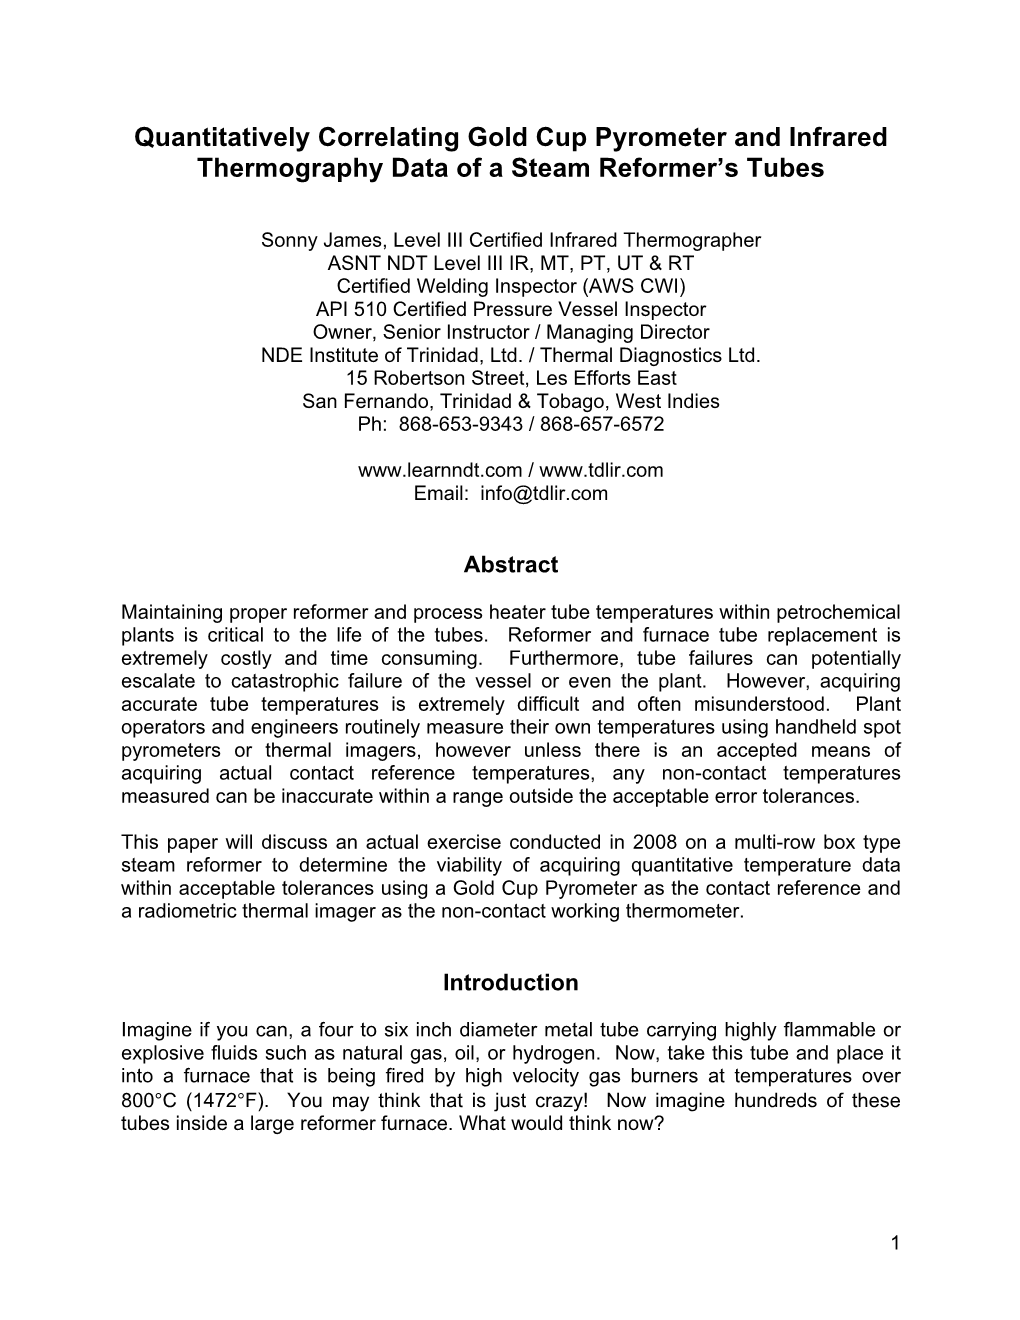 Quantitatively Correlating Gold Cup Pyrometer and Infrared Thermography Data of a Steam Reformer’S Tubes